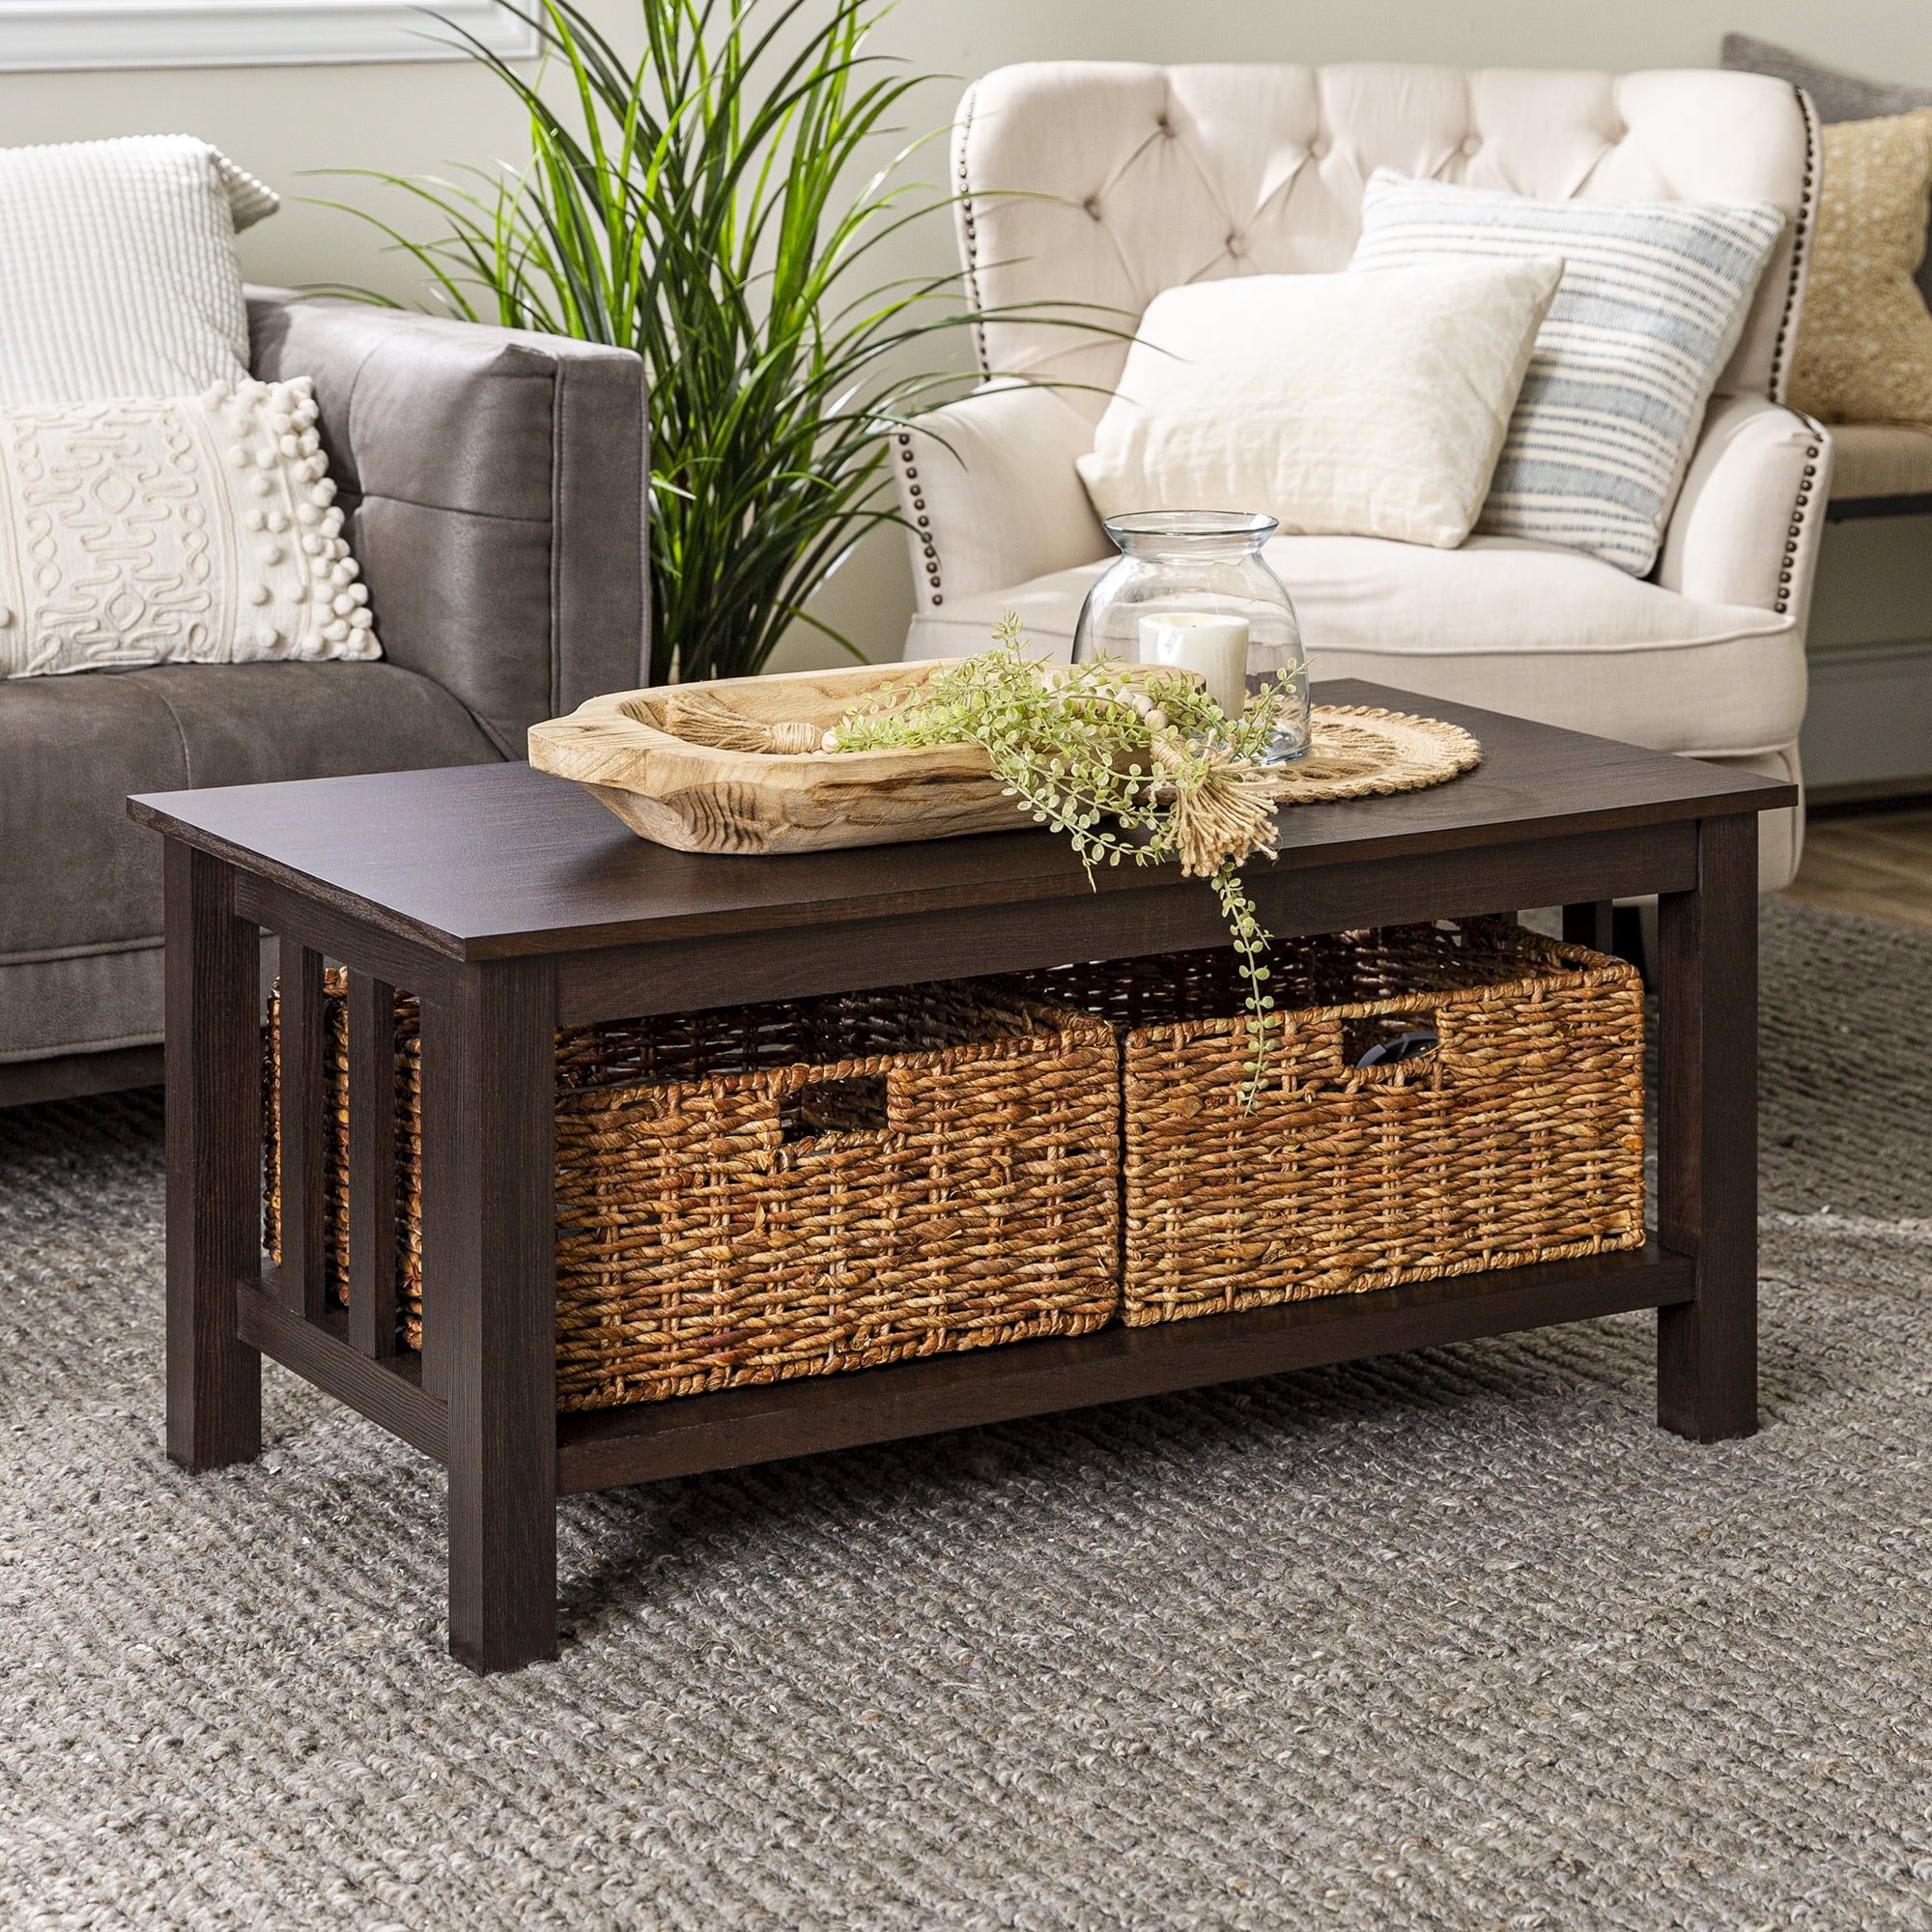 Woven Paths Traditional Storage Coffee Table With Bins, Espresso –  Walmart In Woven Paths Coffee Tables (View 5 of 15)